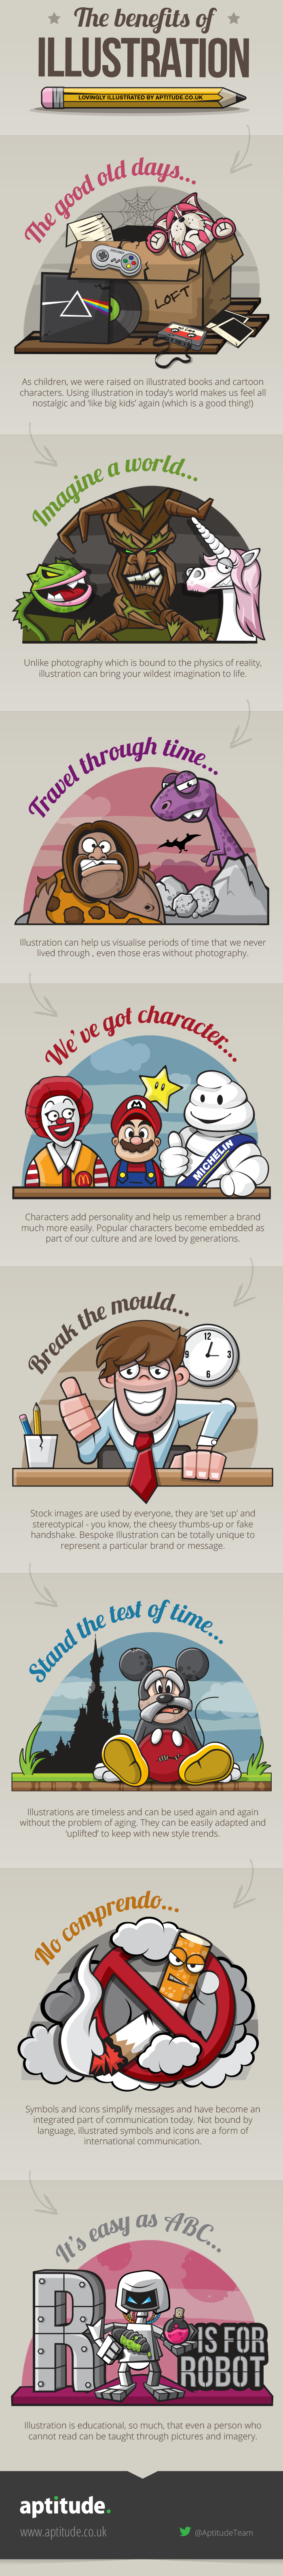 The Importance of Illustration Infographic